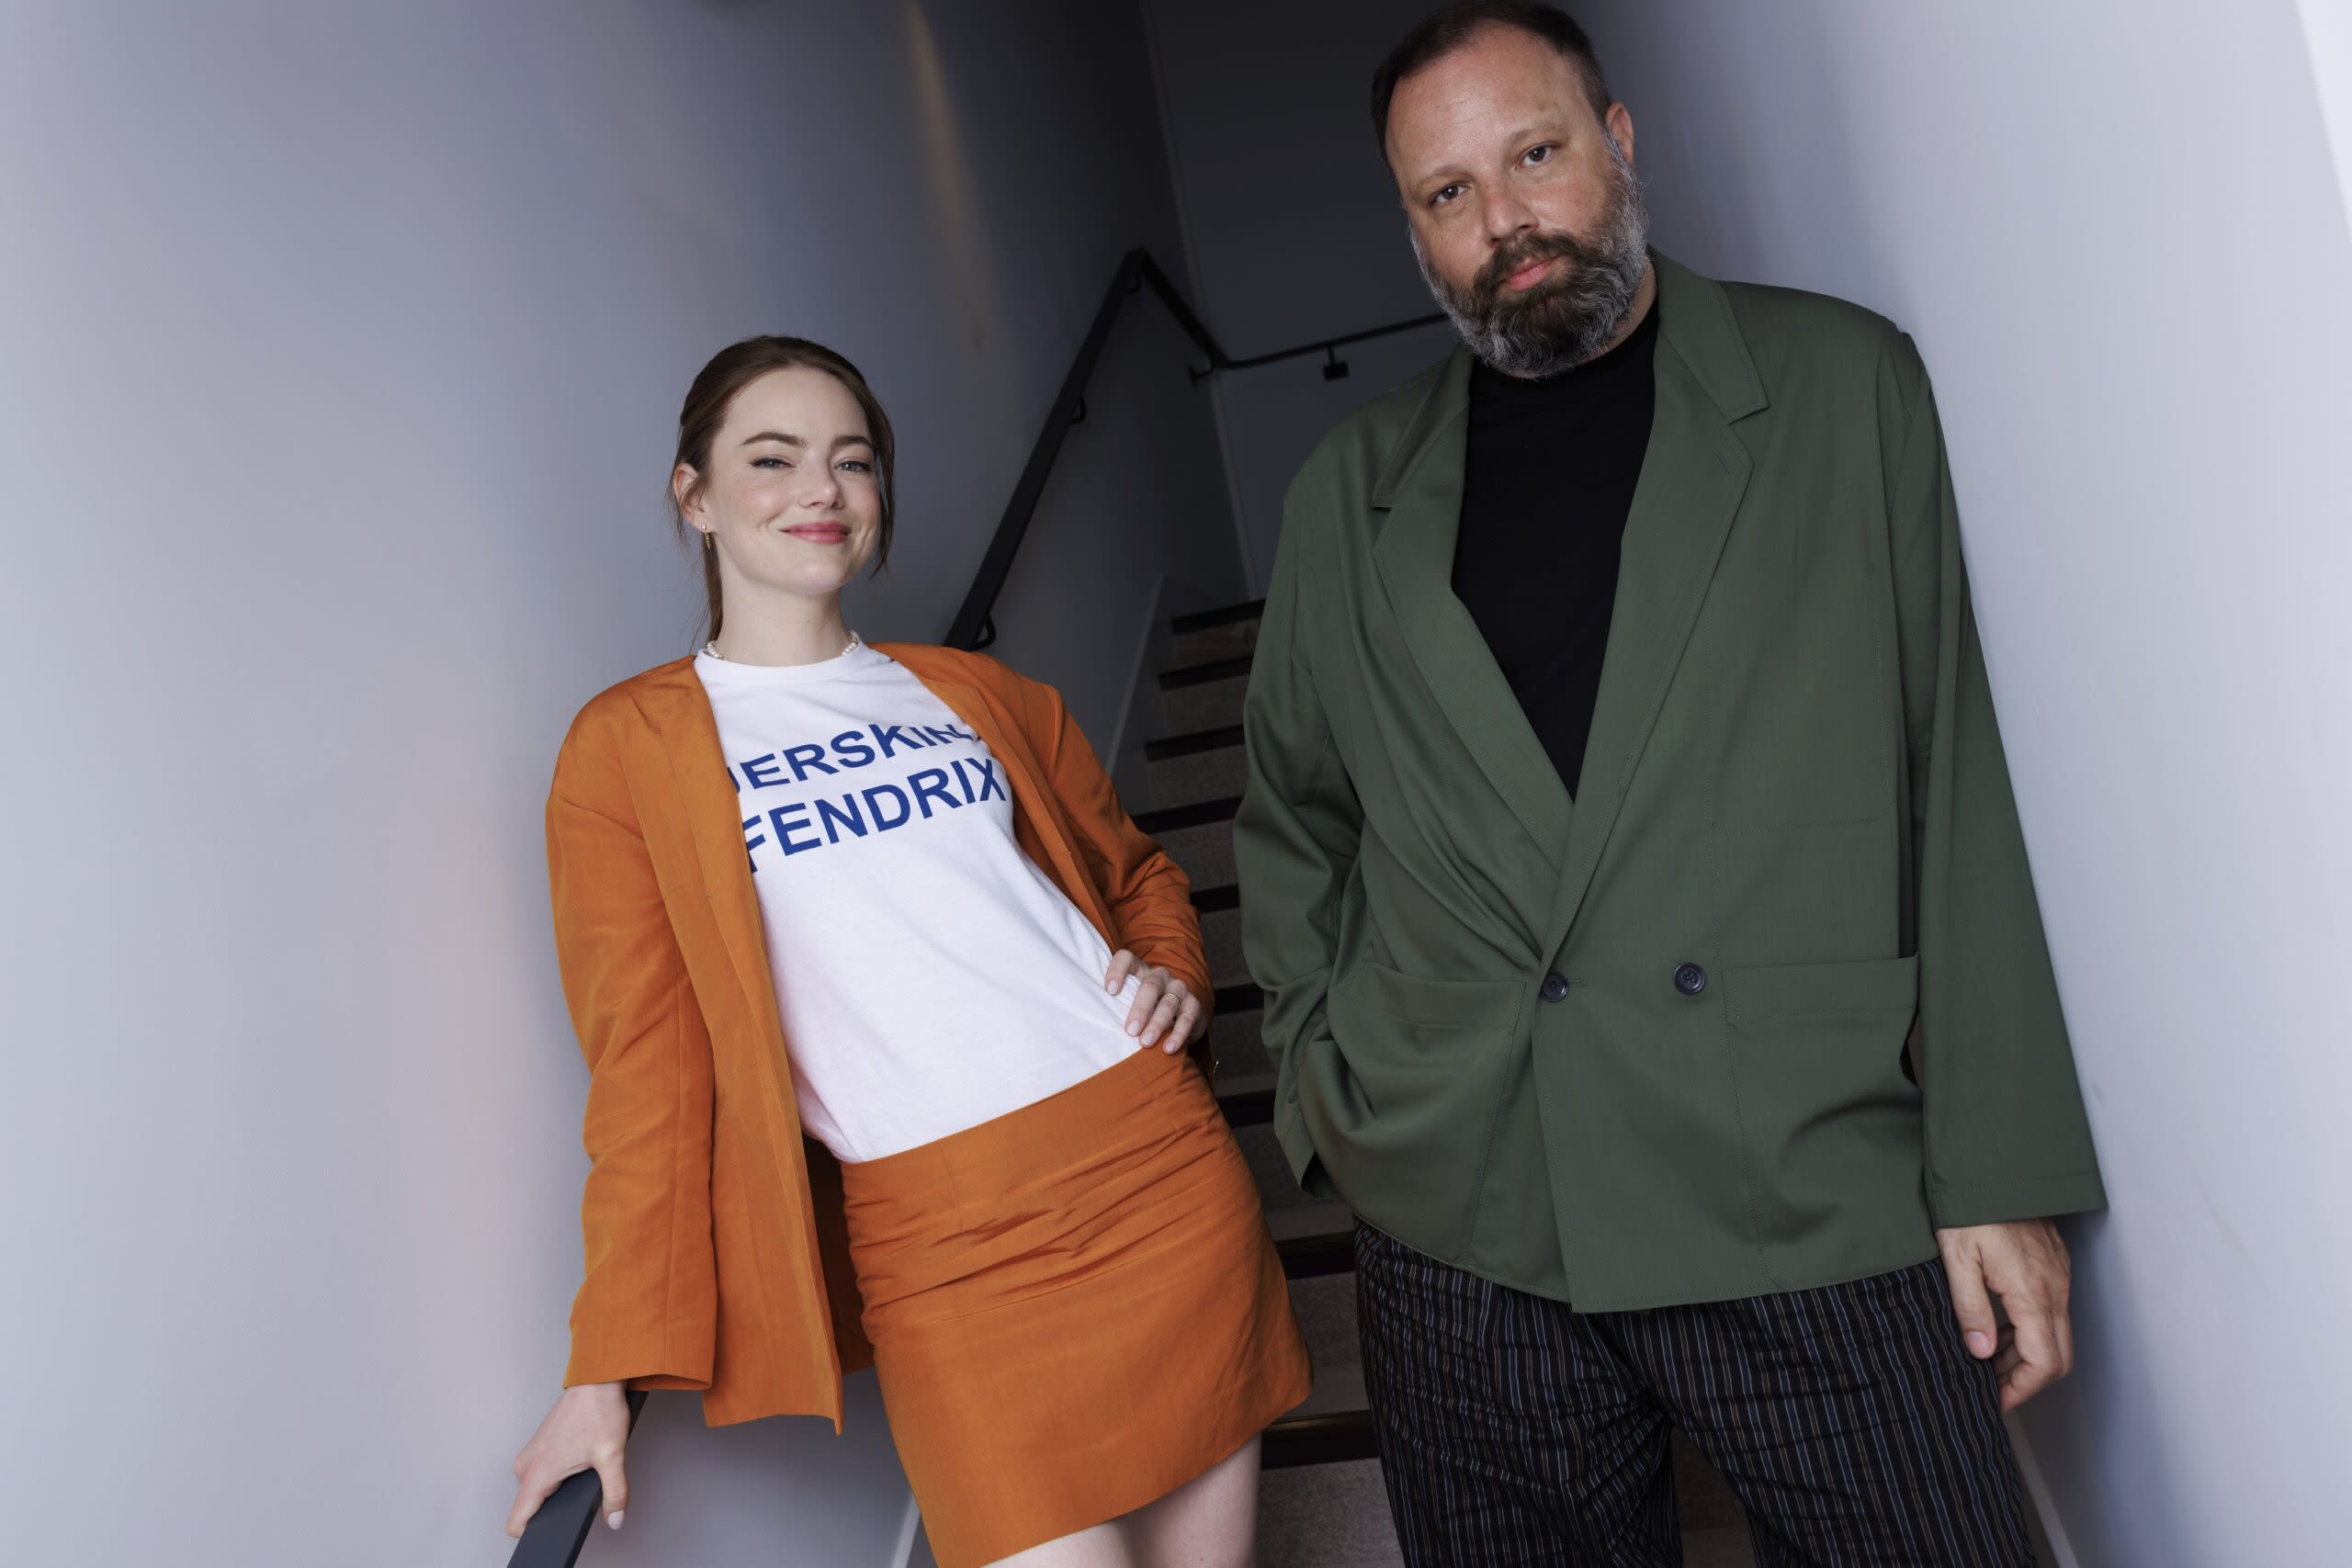 The unstoppable duo of Emma Stone and Yorgos Lanthimos - WTOP News